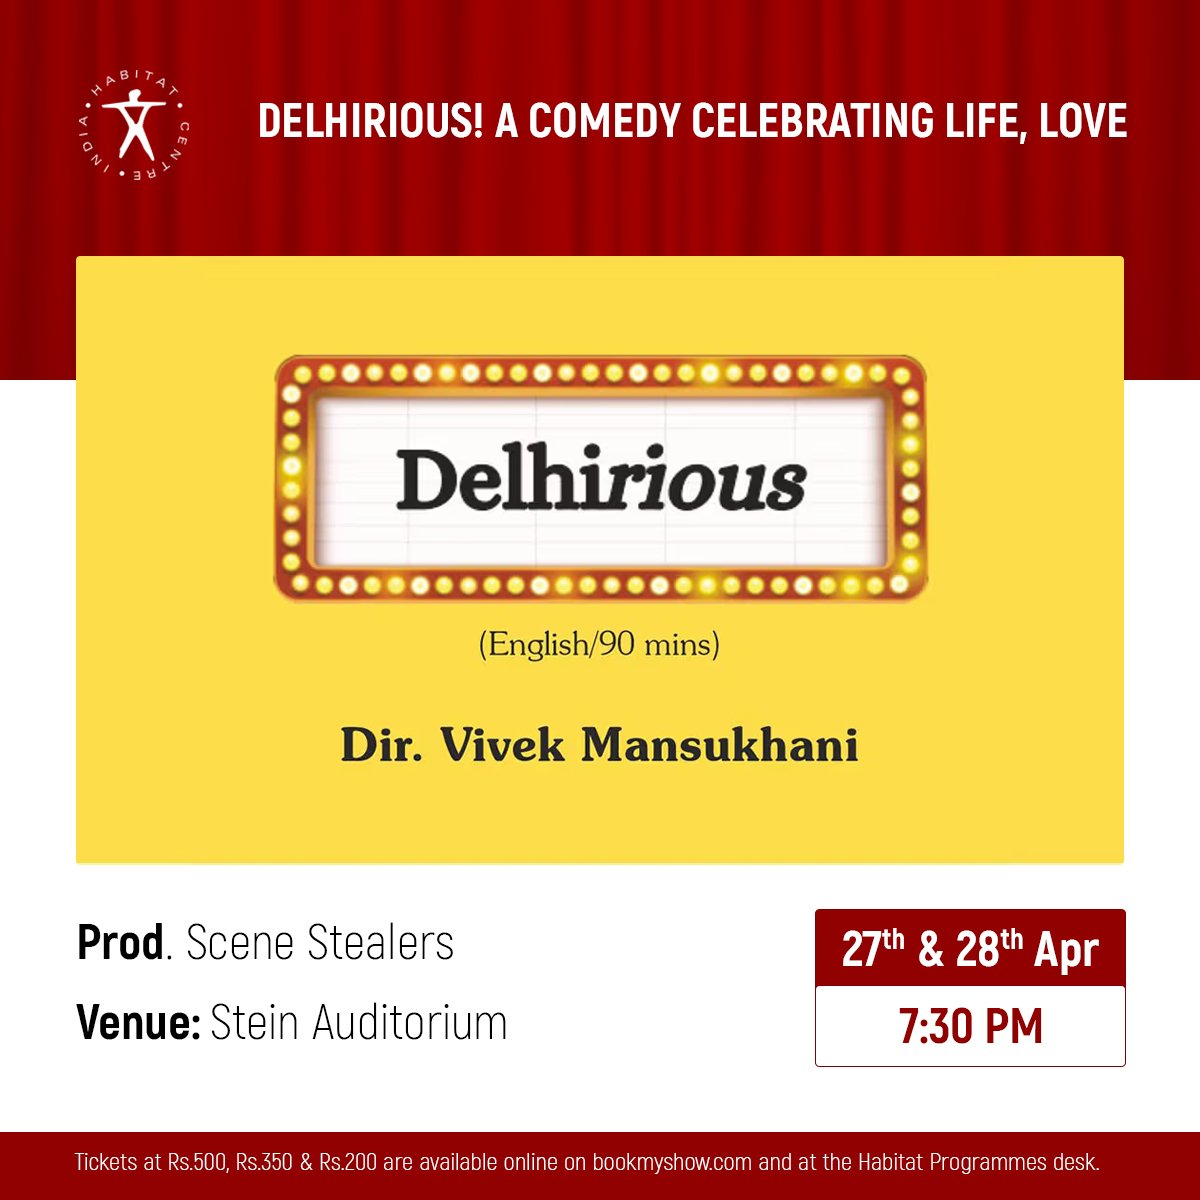 Get ready for a delightful evening of theatre with Delhirious (English/90 mins). Directed by Vivek Mansukhani. A comedy celebrating life, love and connection. Shanaya and Ved have invited a motley bunch of their close friends to their lavish wedding celebrations in New Delhi.…